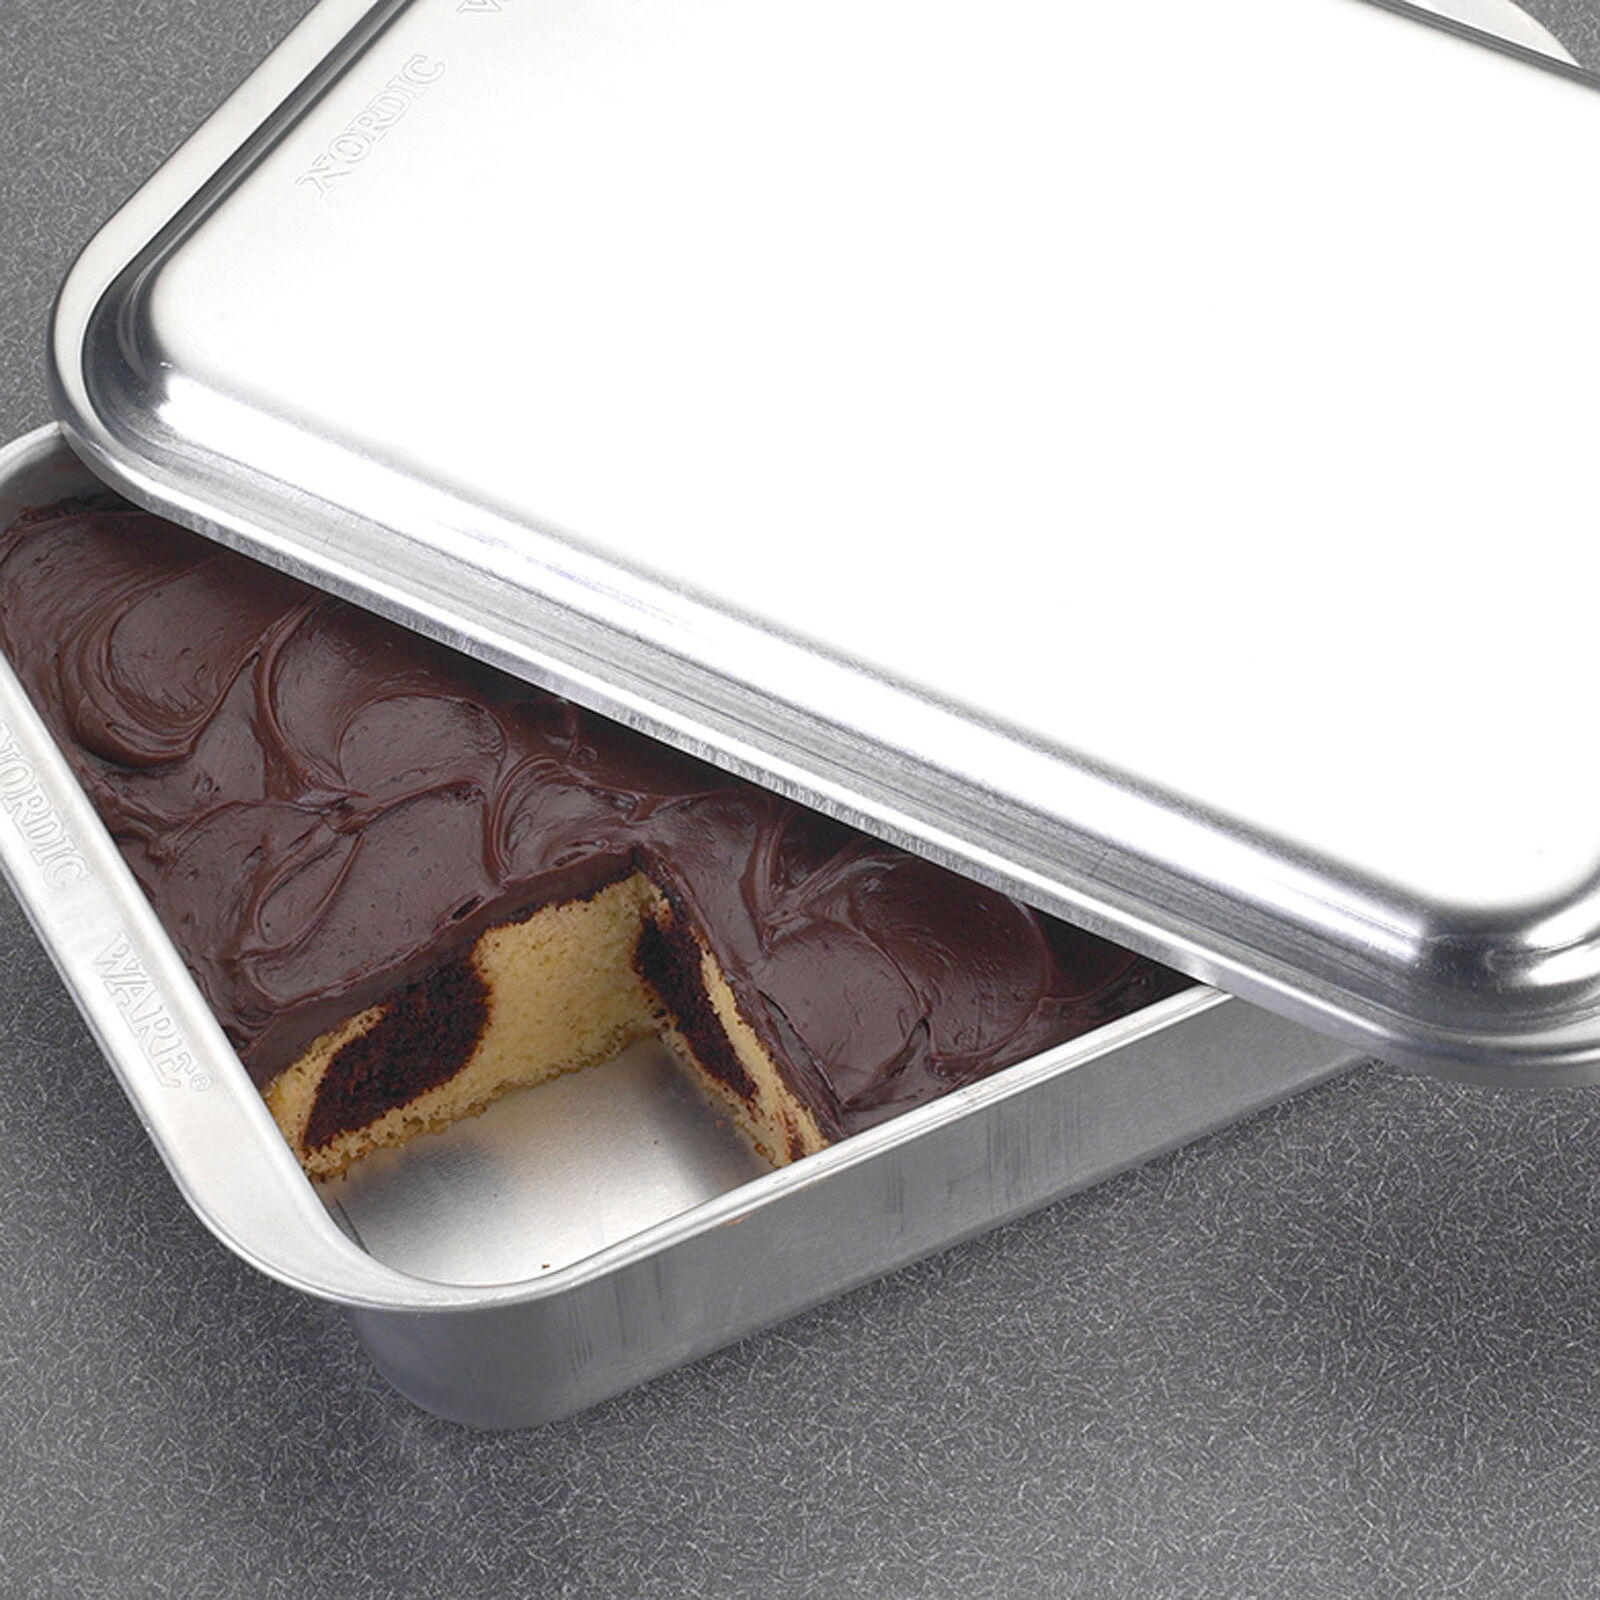 Nordic Ware 9 x 13 baking pan with lid, made of natural aluminum for durability